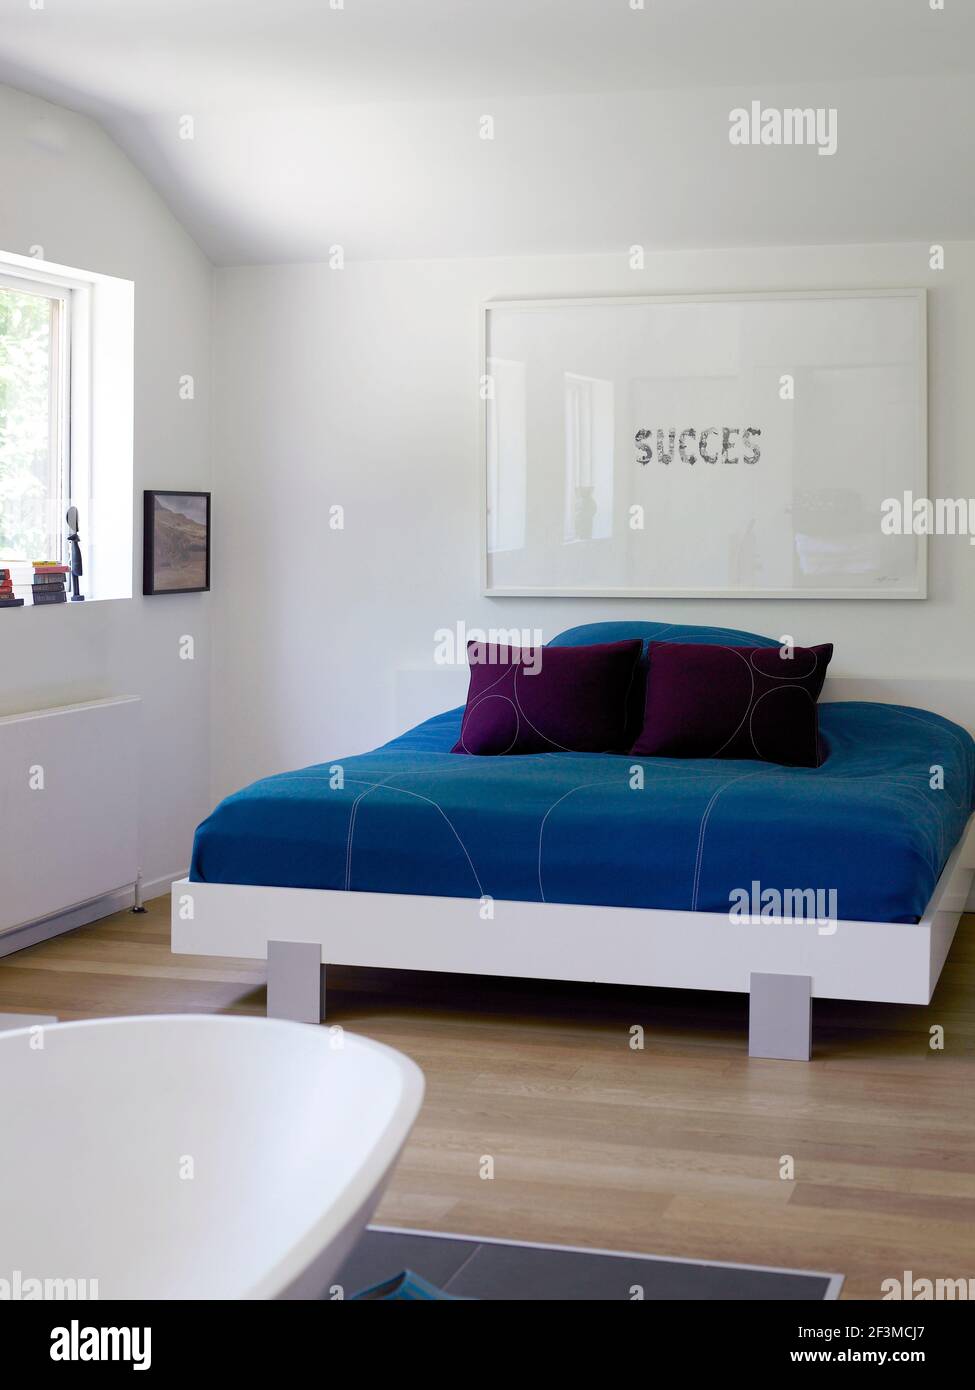 Blue bedcovers under artwork reading 'success' in bedroom of residential house, Denmark. Stock Photo